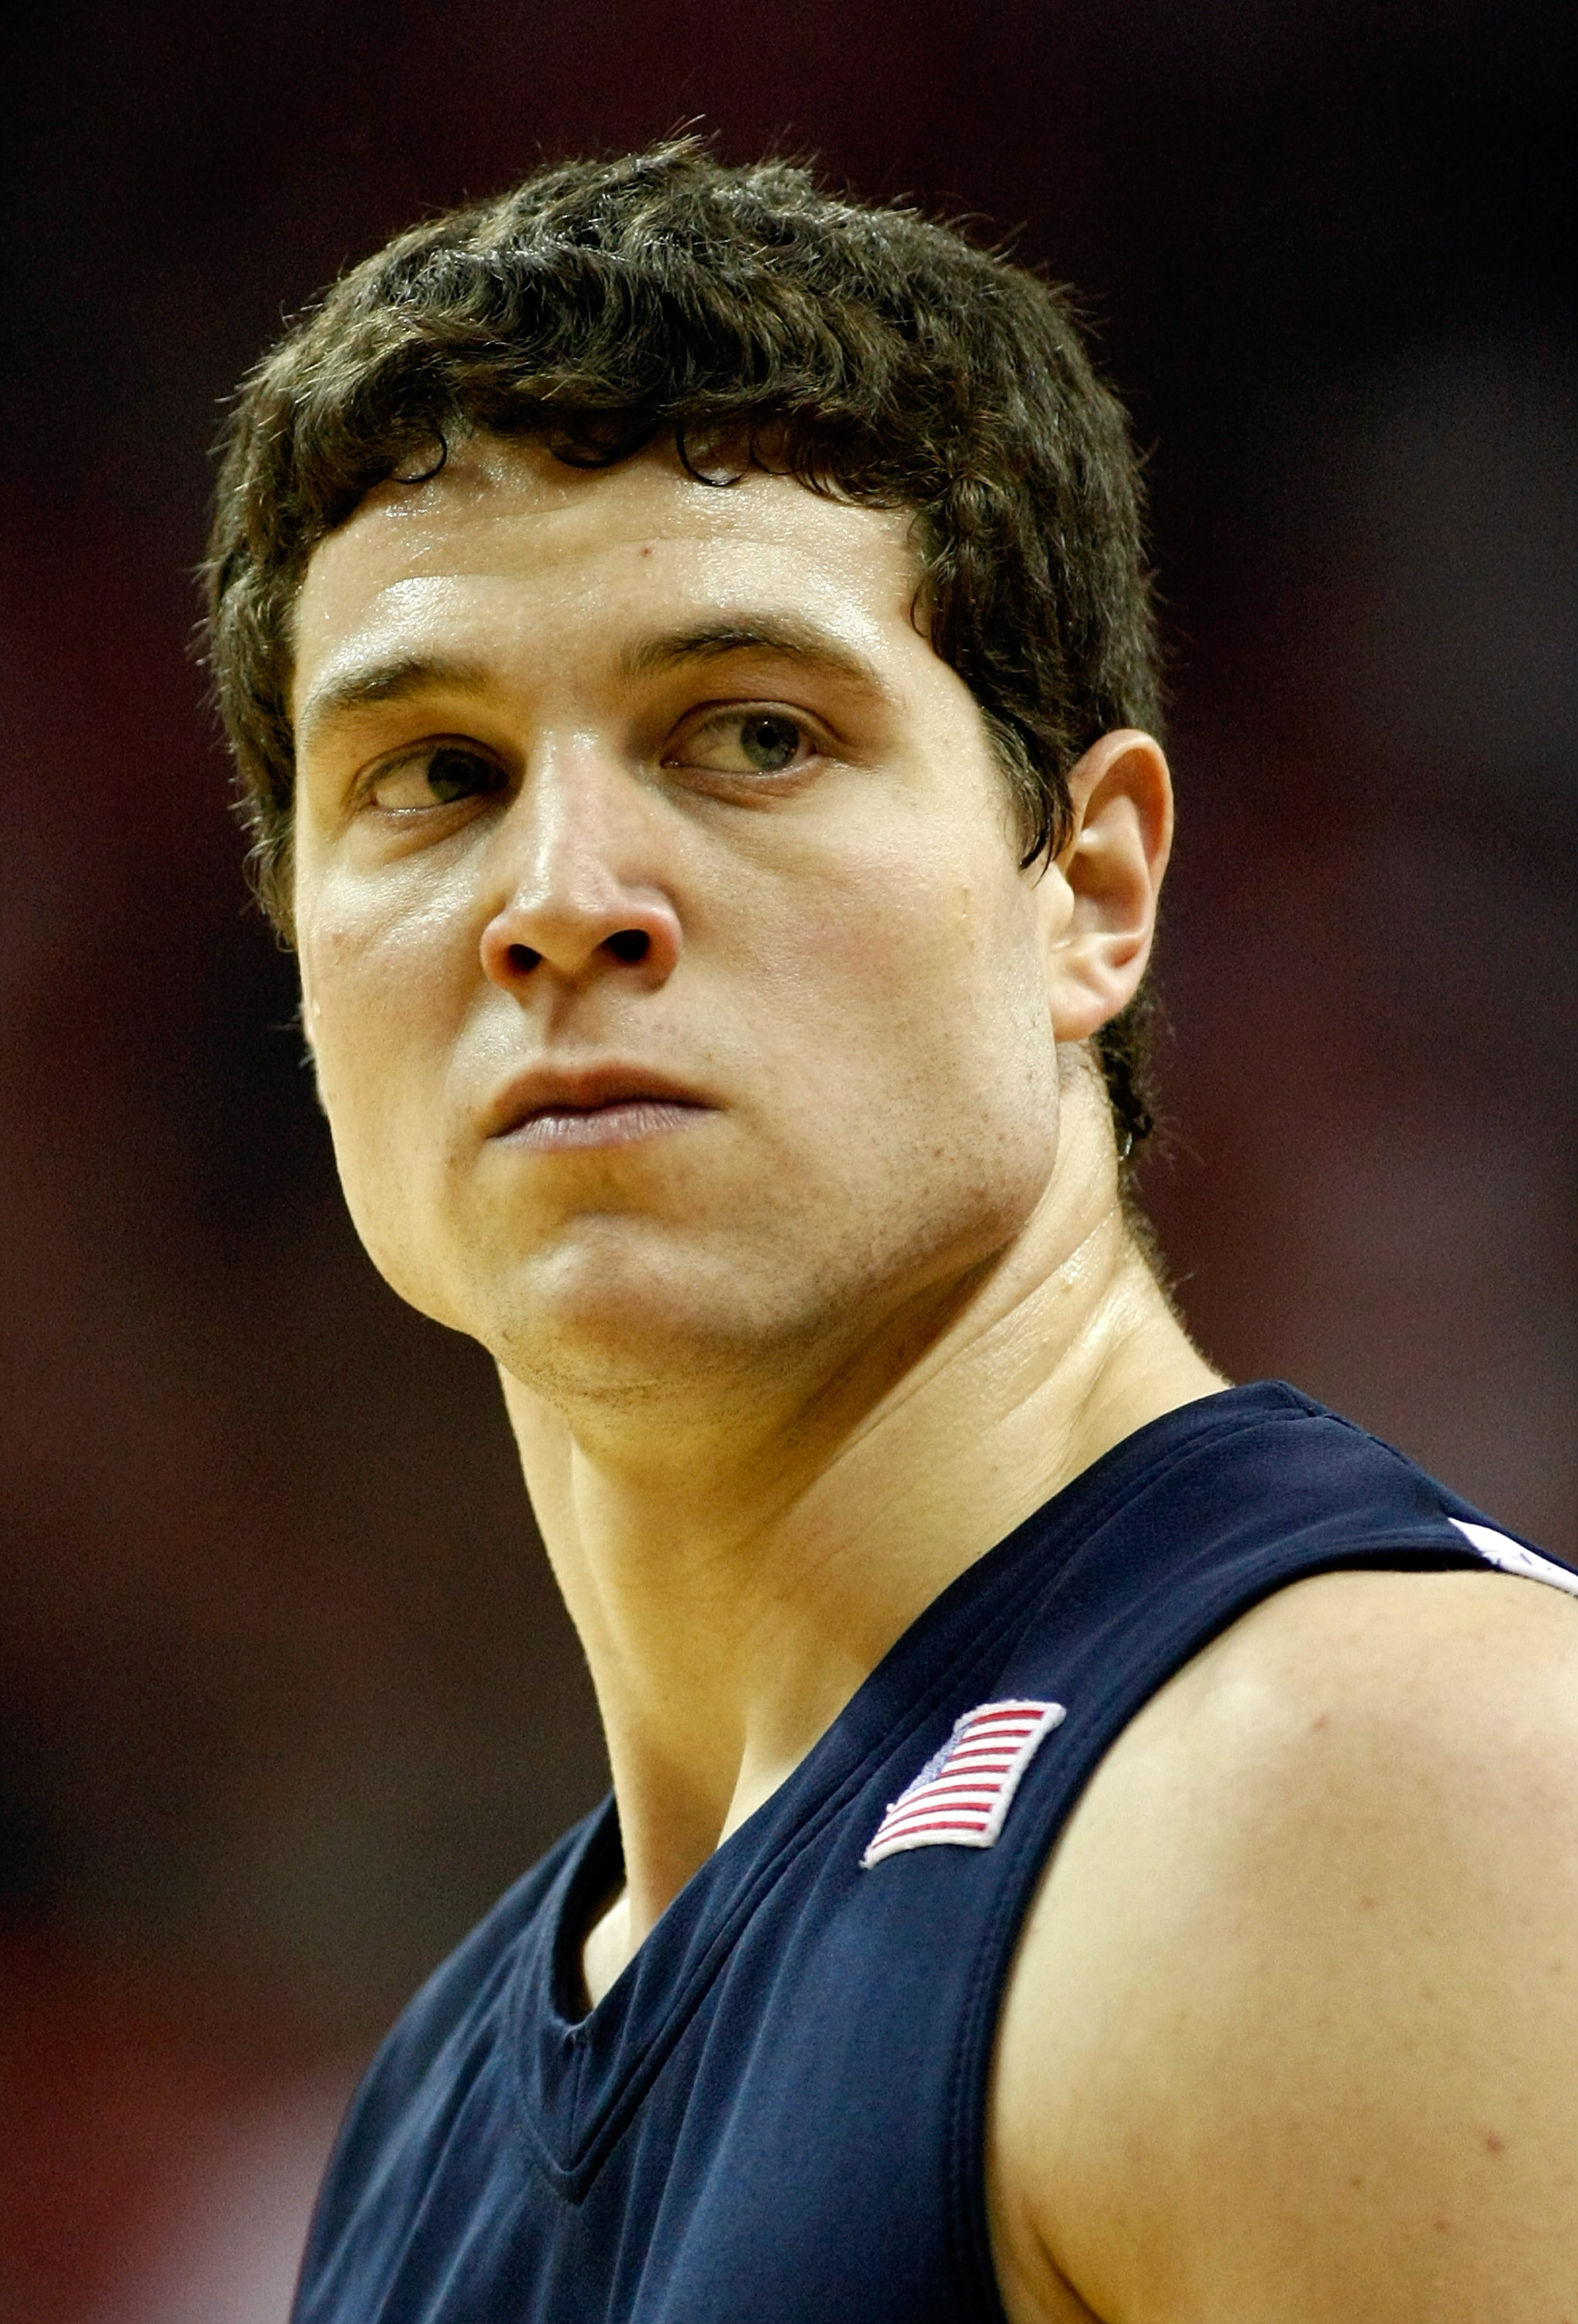 NBA Draft: Jimmer Fredette, Kemba Walker and the 10 Most Explosive